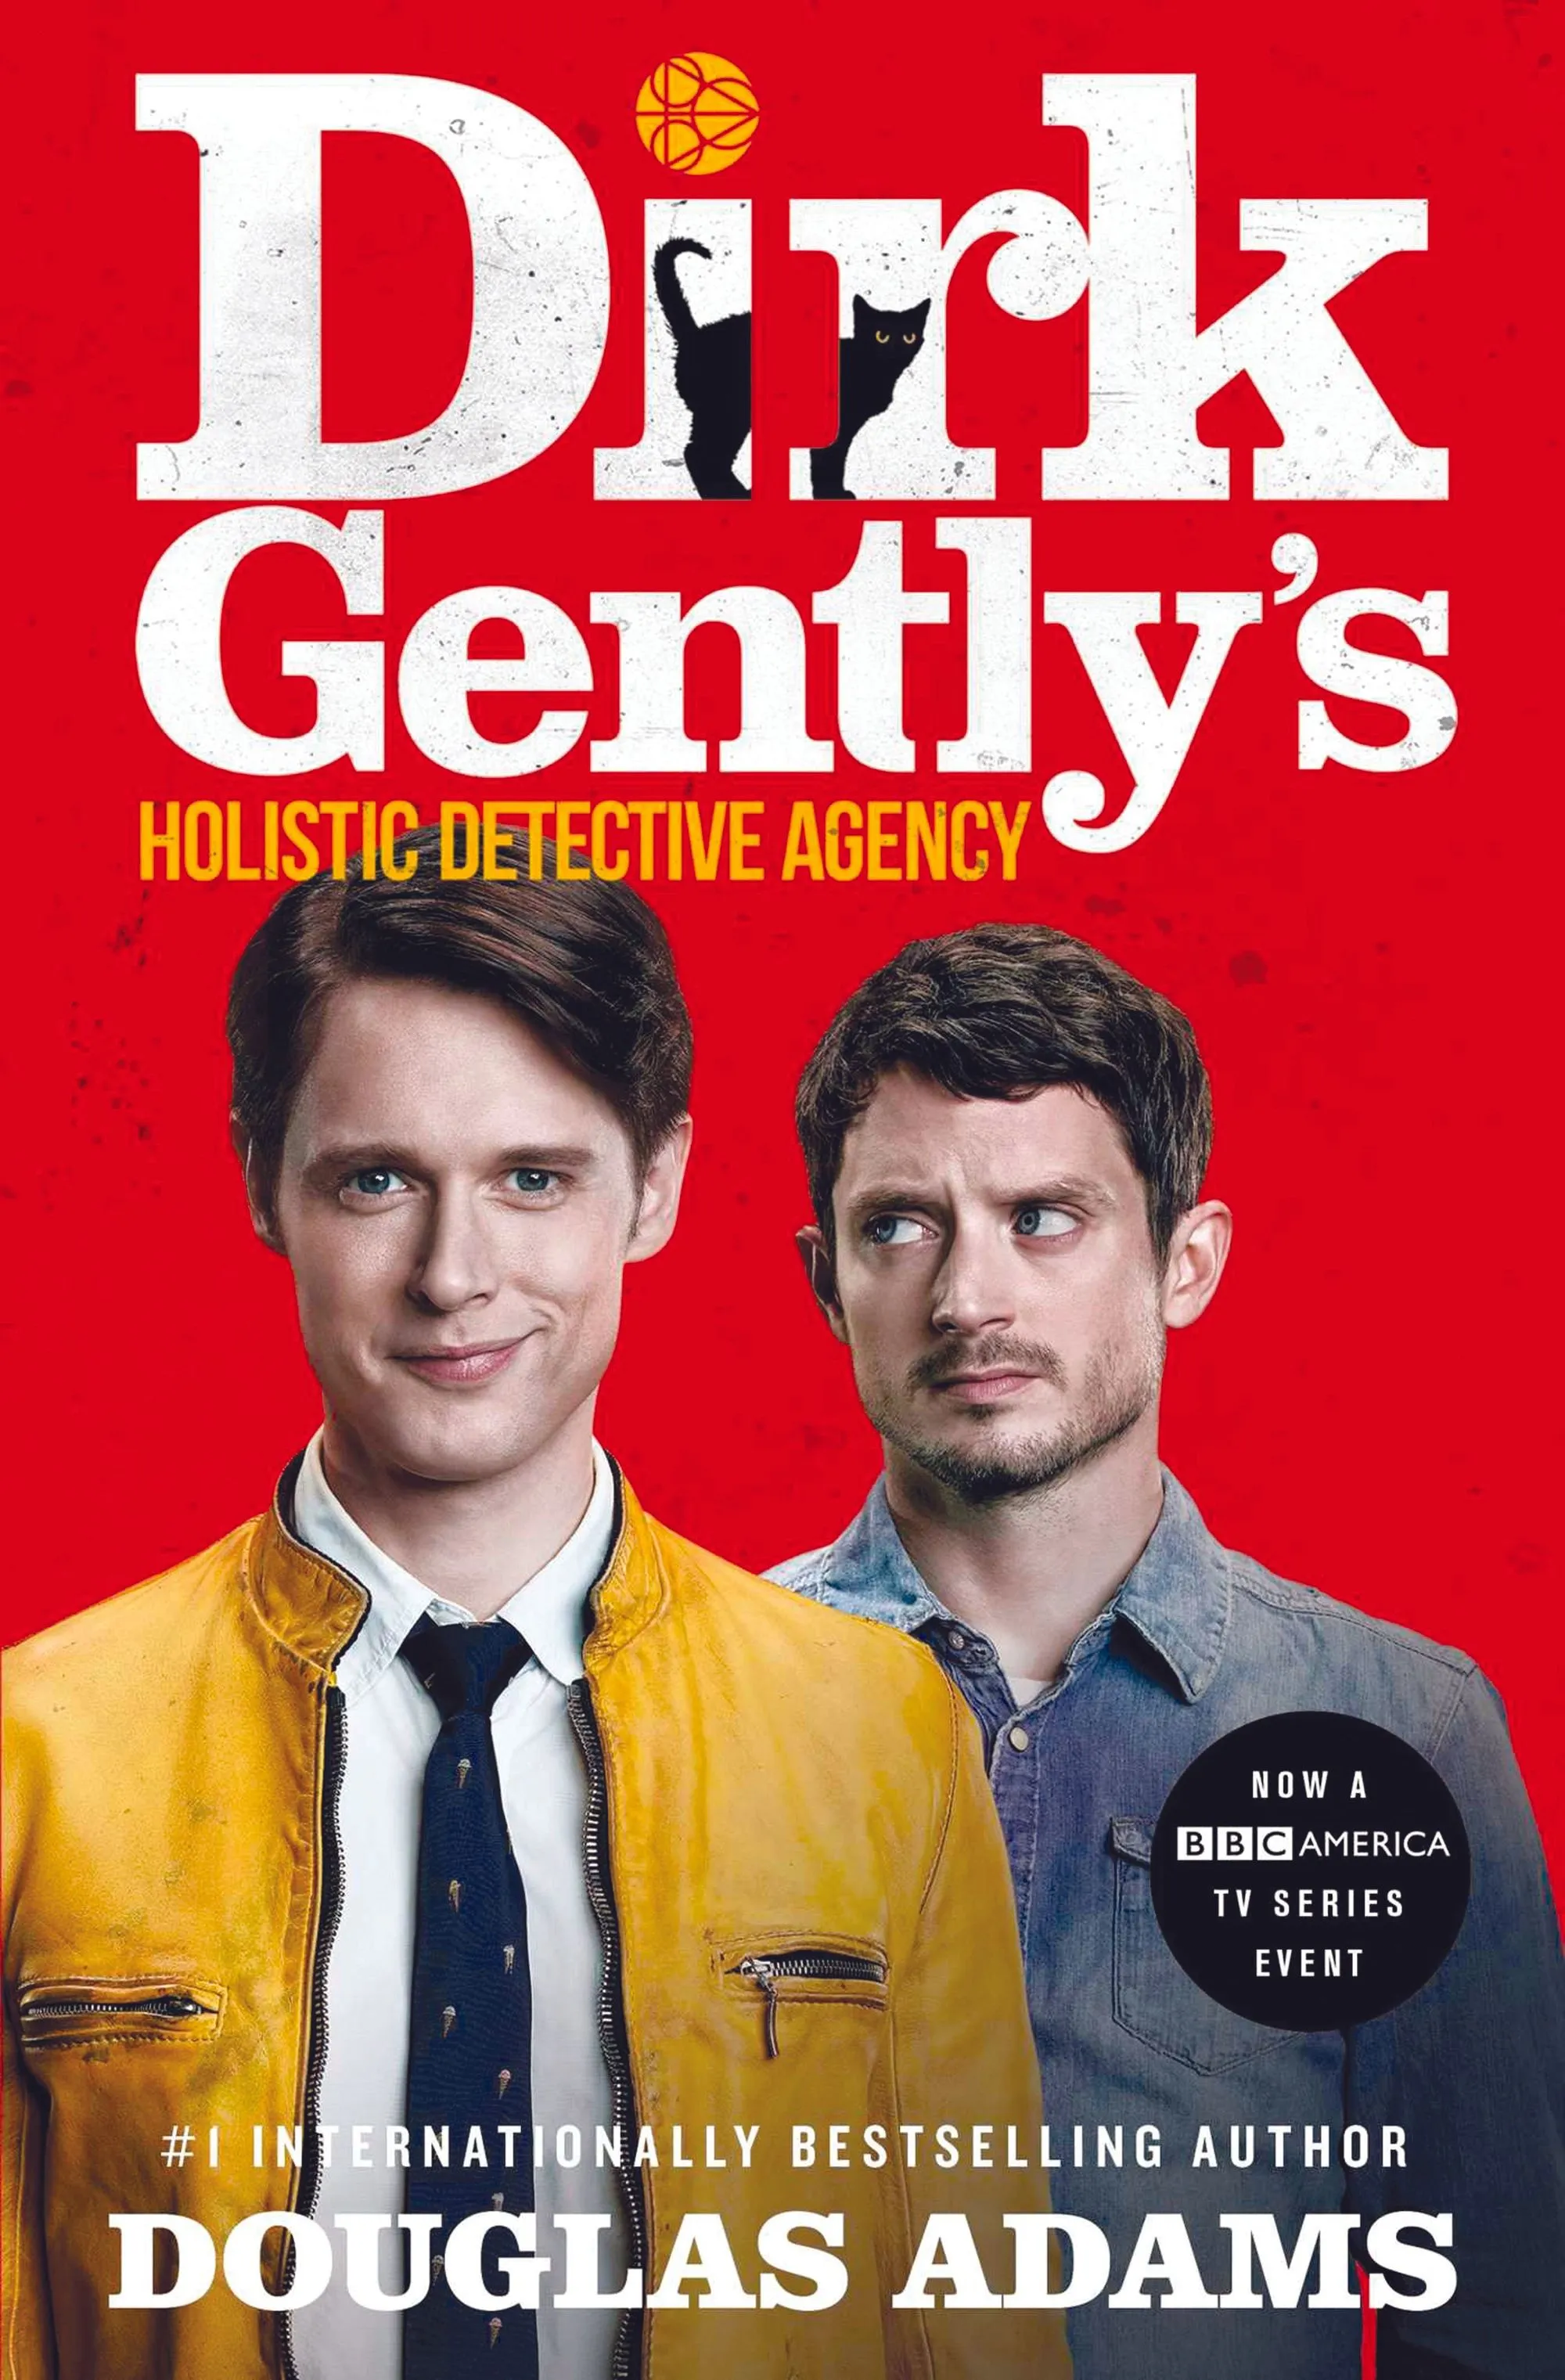 Dirk Gently's Holistic Detective Agency, by Max Landis.